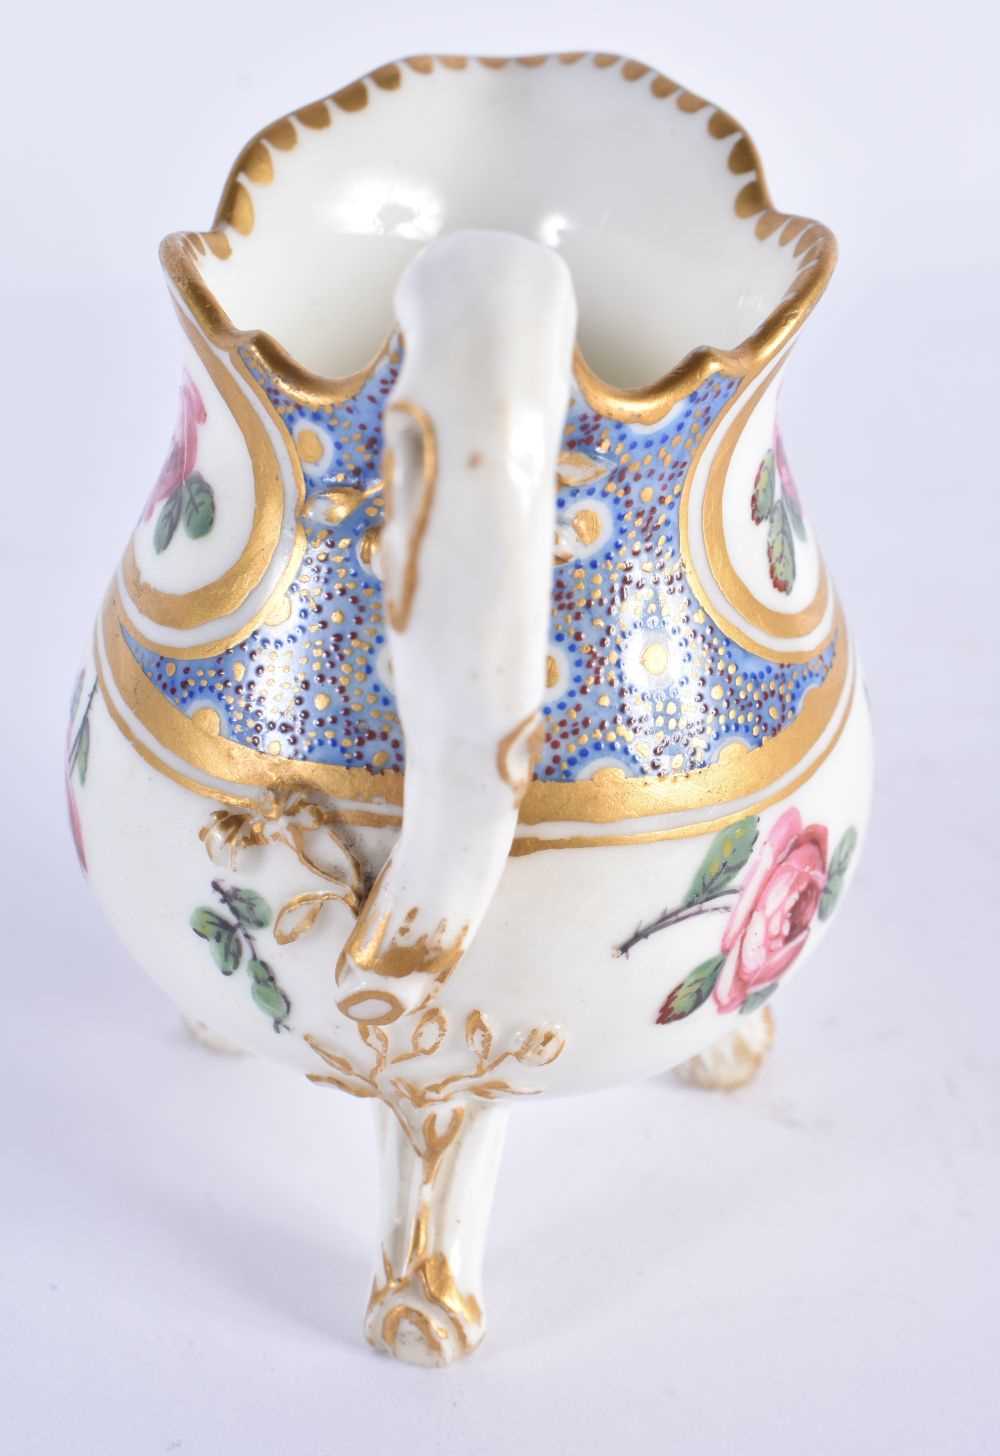 AN 18TH CENTURY FRENCH SEVRES PORCELAIN CREAM JUG painted with flowers. 9 cm x 8 cm. - Image 2 of 6